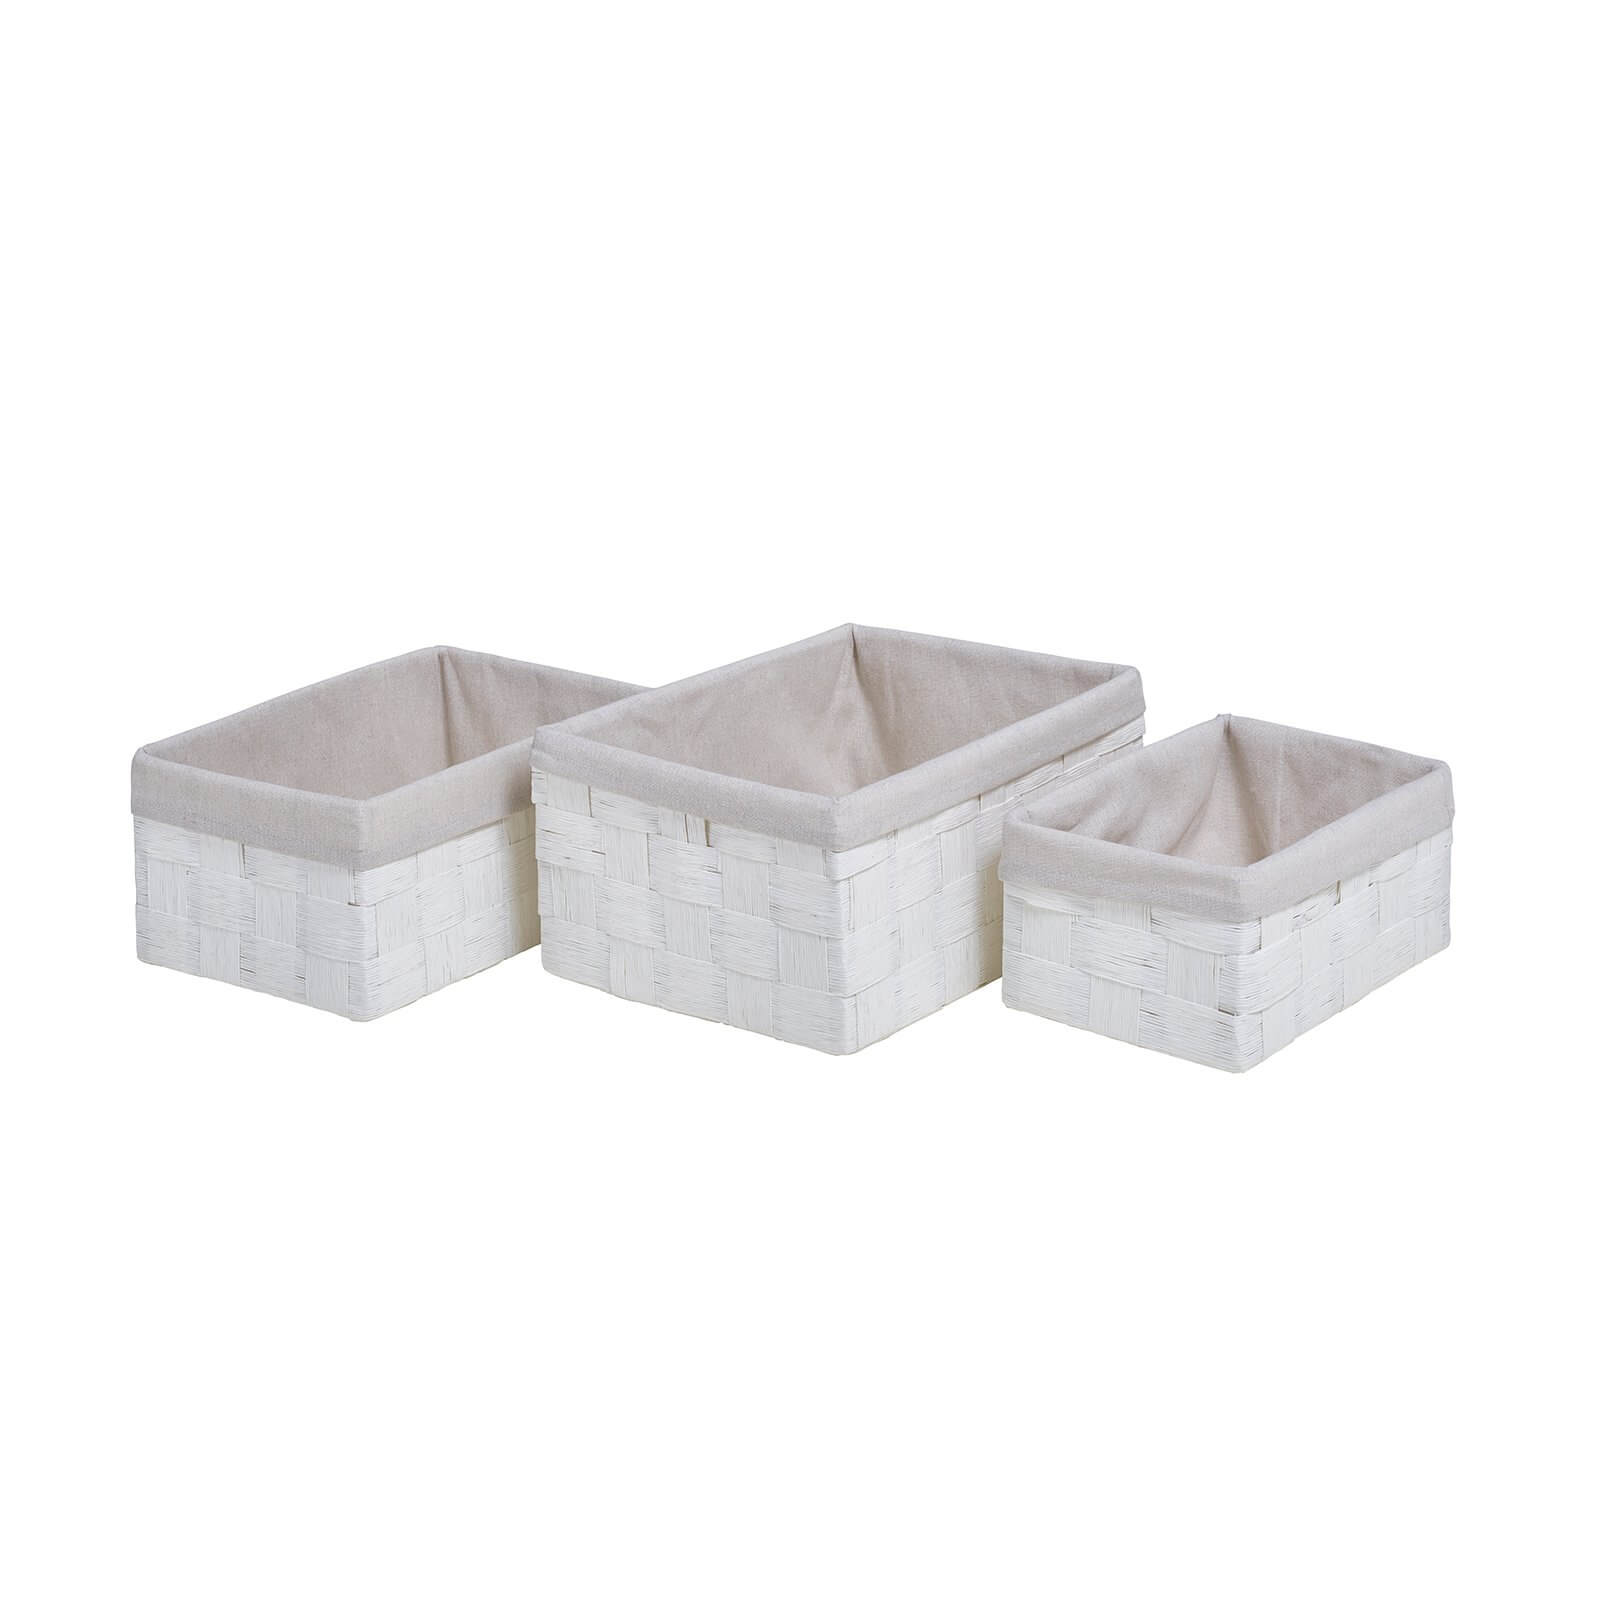 Photo of Paper Weave Baskets - White - Set Of 3